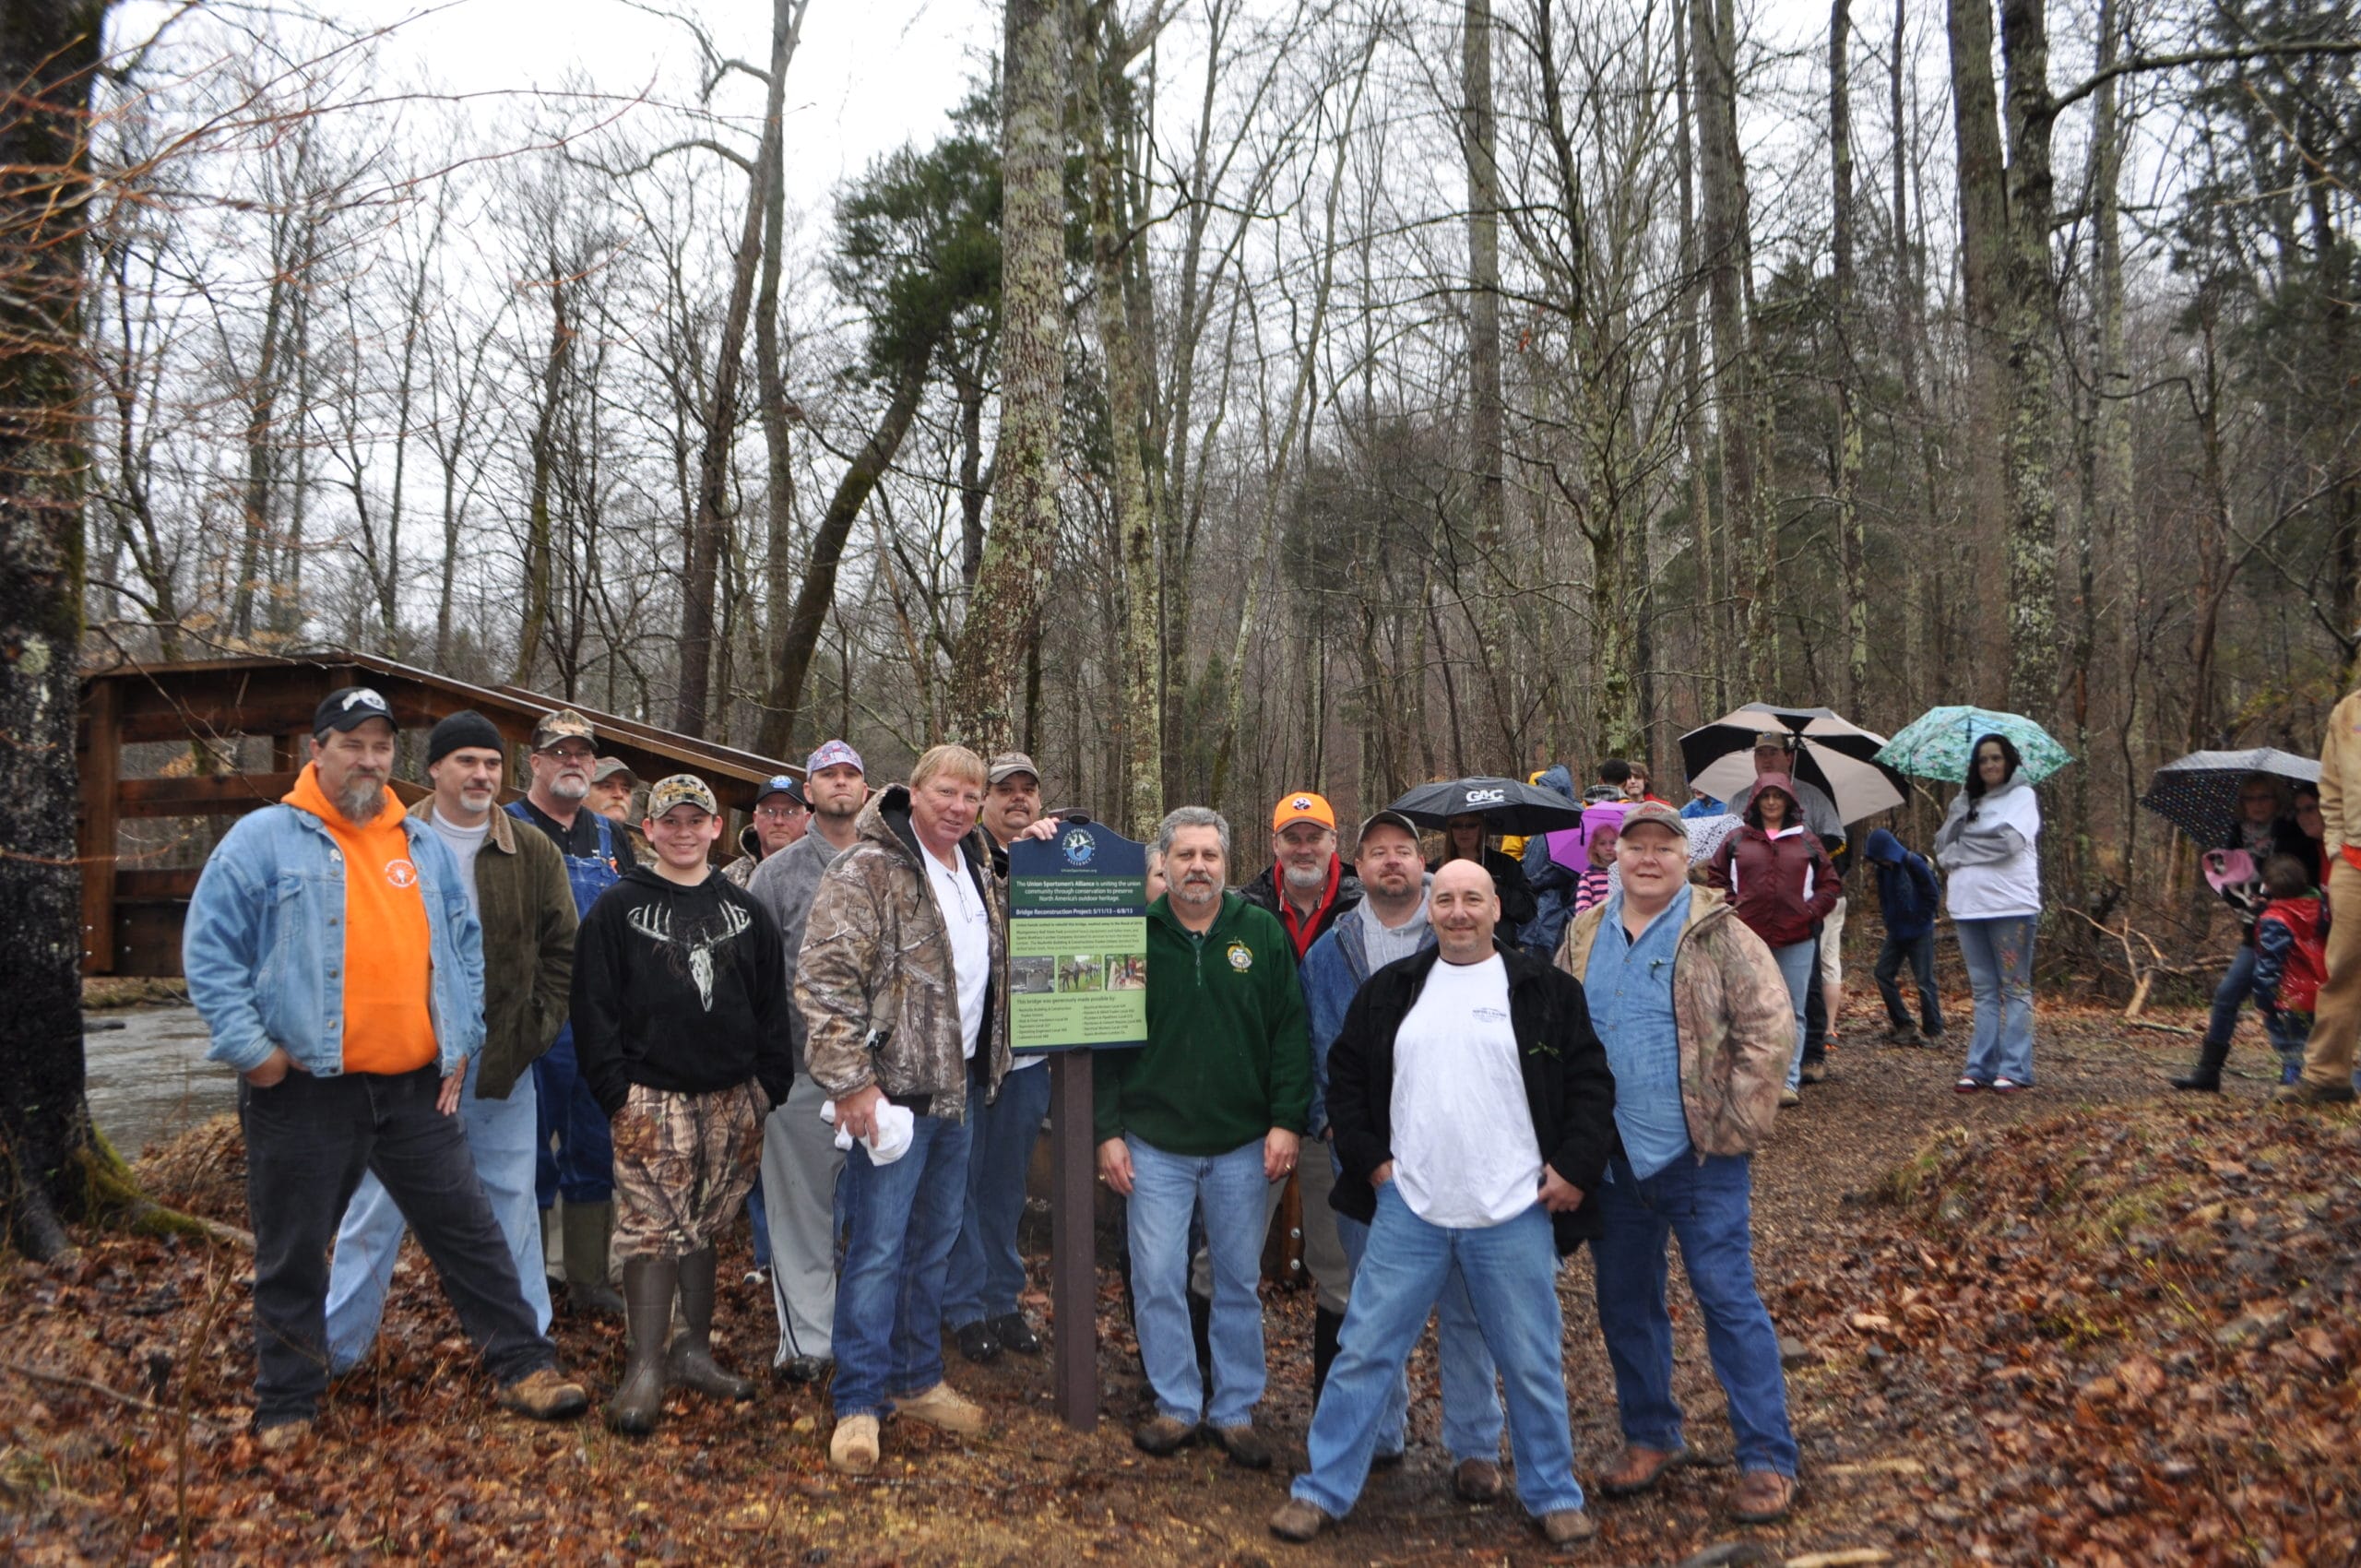 Tradesmen and women from the Nashville Building and Construction Trades who volunteered their time and talents to rebuild a bridge in the heart of Montgomery Bell State Park stand beside a permanent sign installed to recognize their contribution.